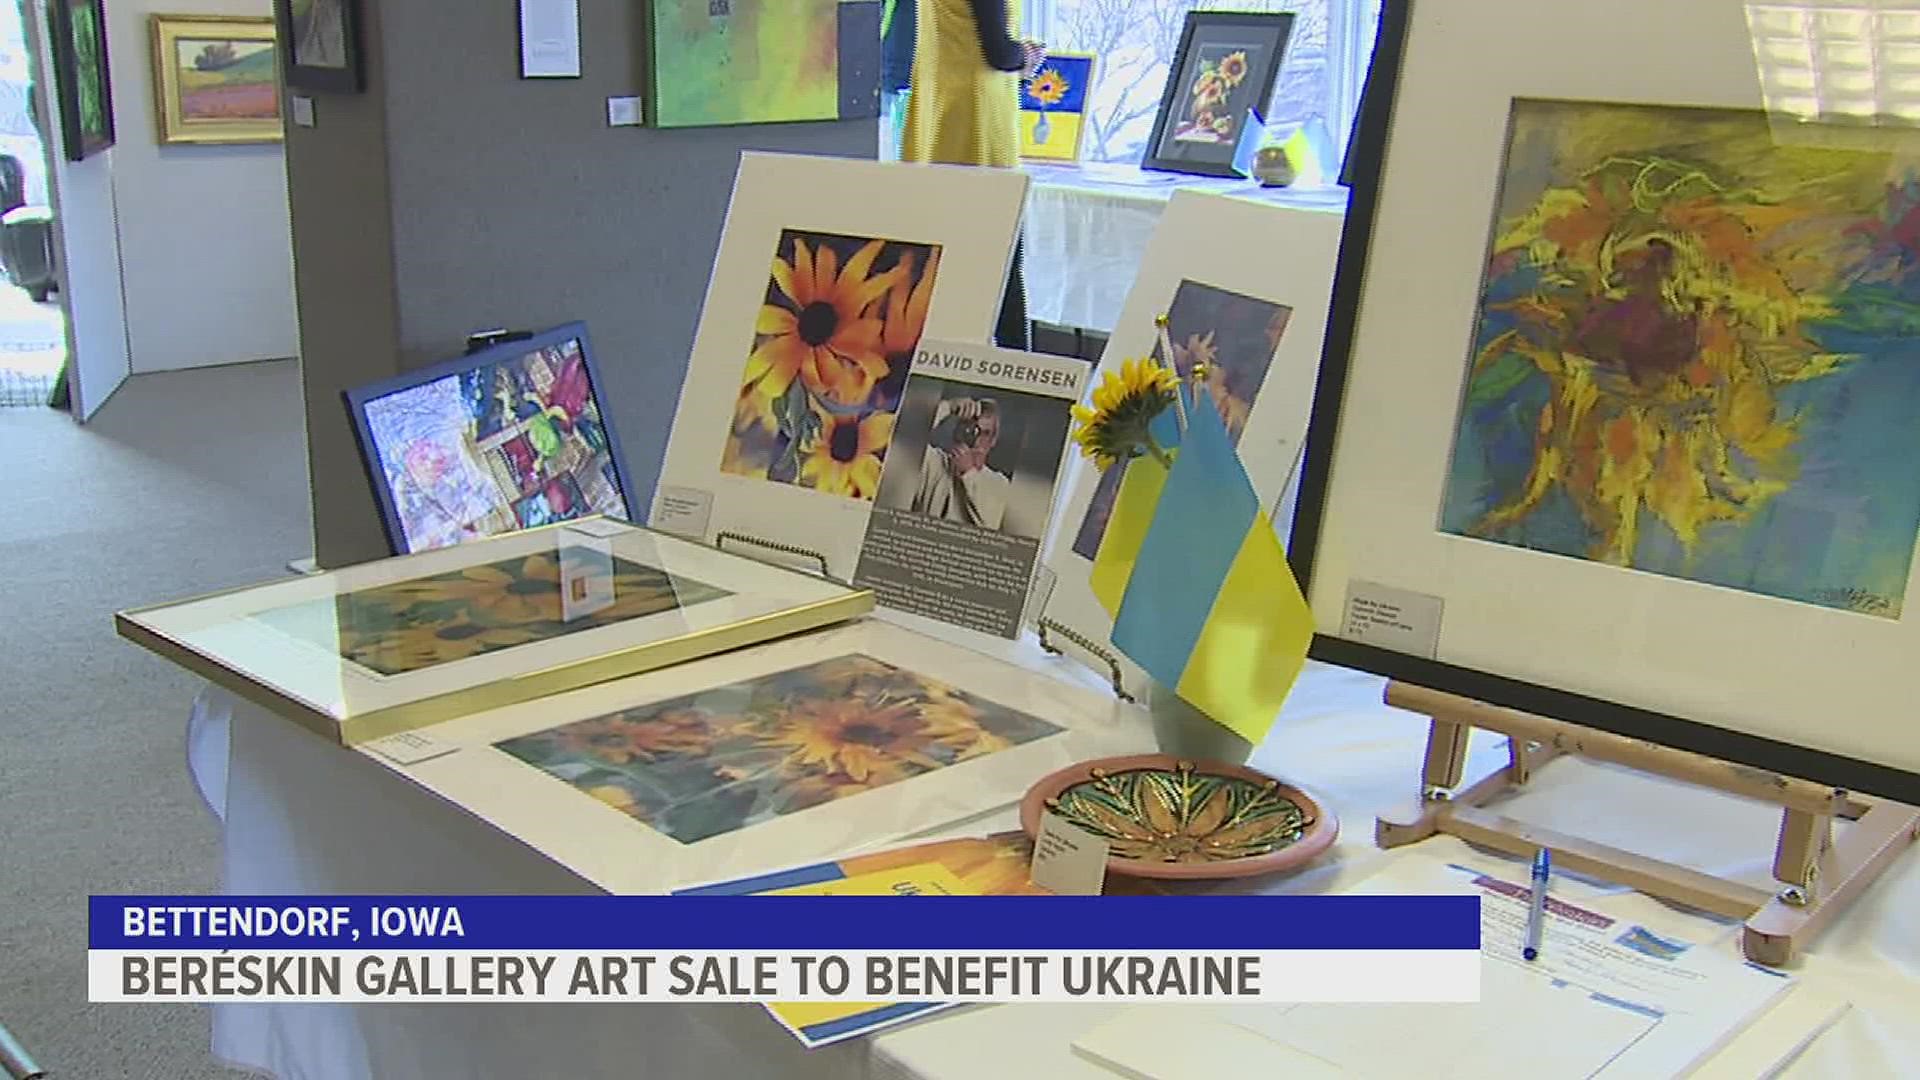 More than hundred pieces of artwork were on display for a fundraiser at Beréskin Gallery & Art Academy in Bettendorf Friday.